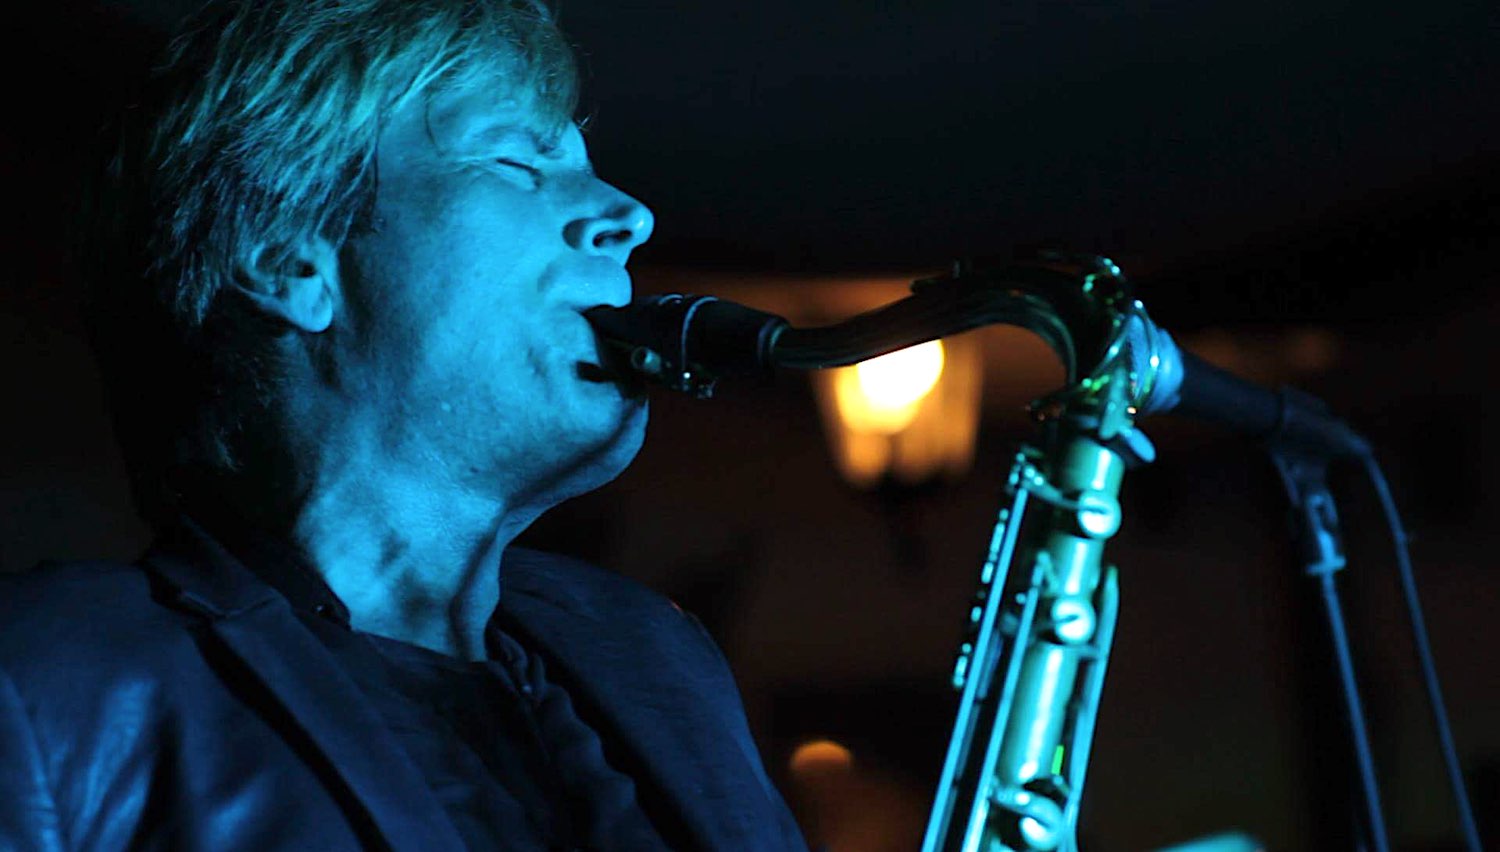 Pop Up Tour of Italy: Steve Norman torna in Italia - TuscanyPeople